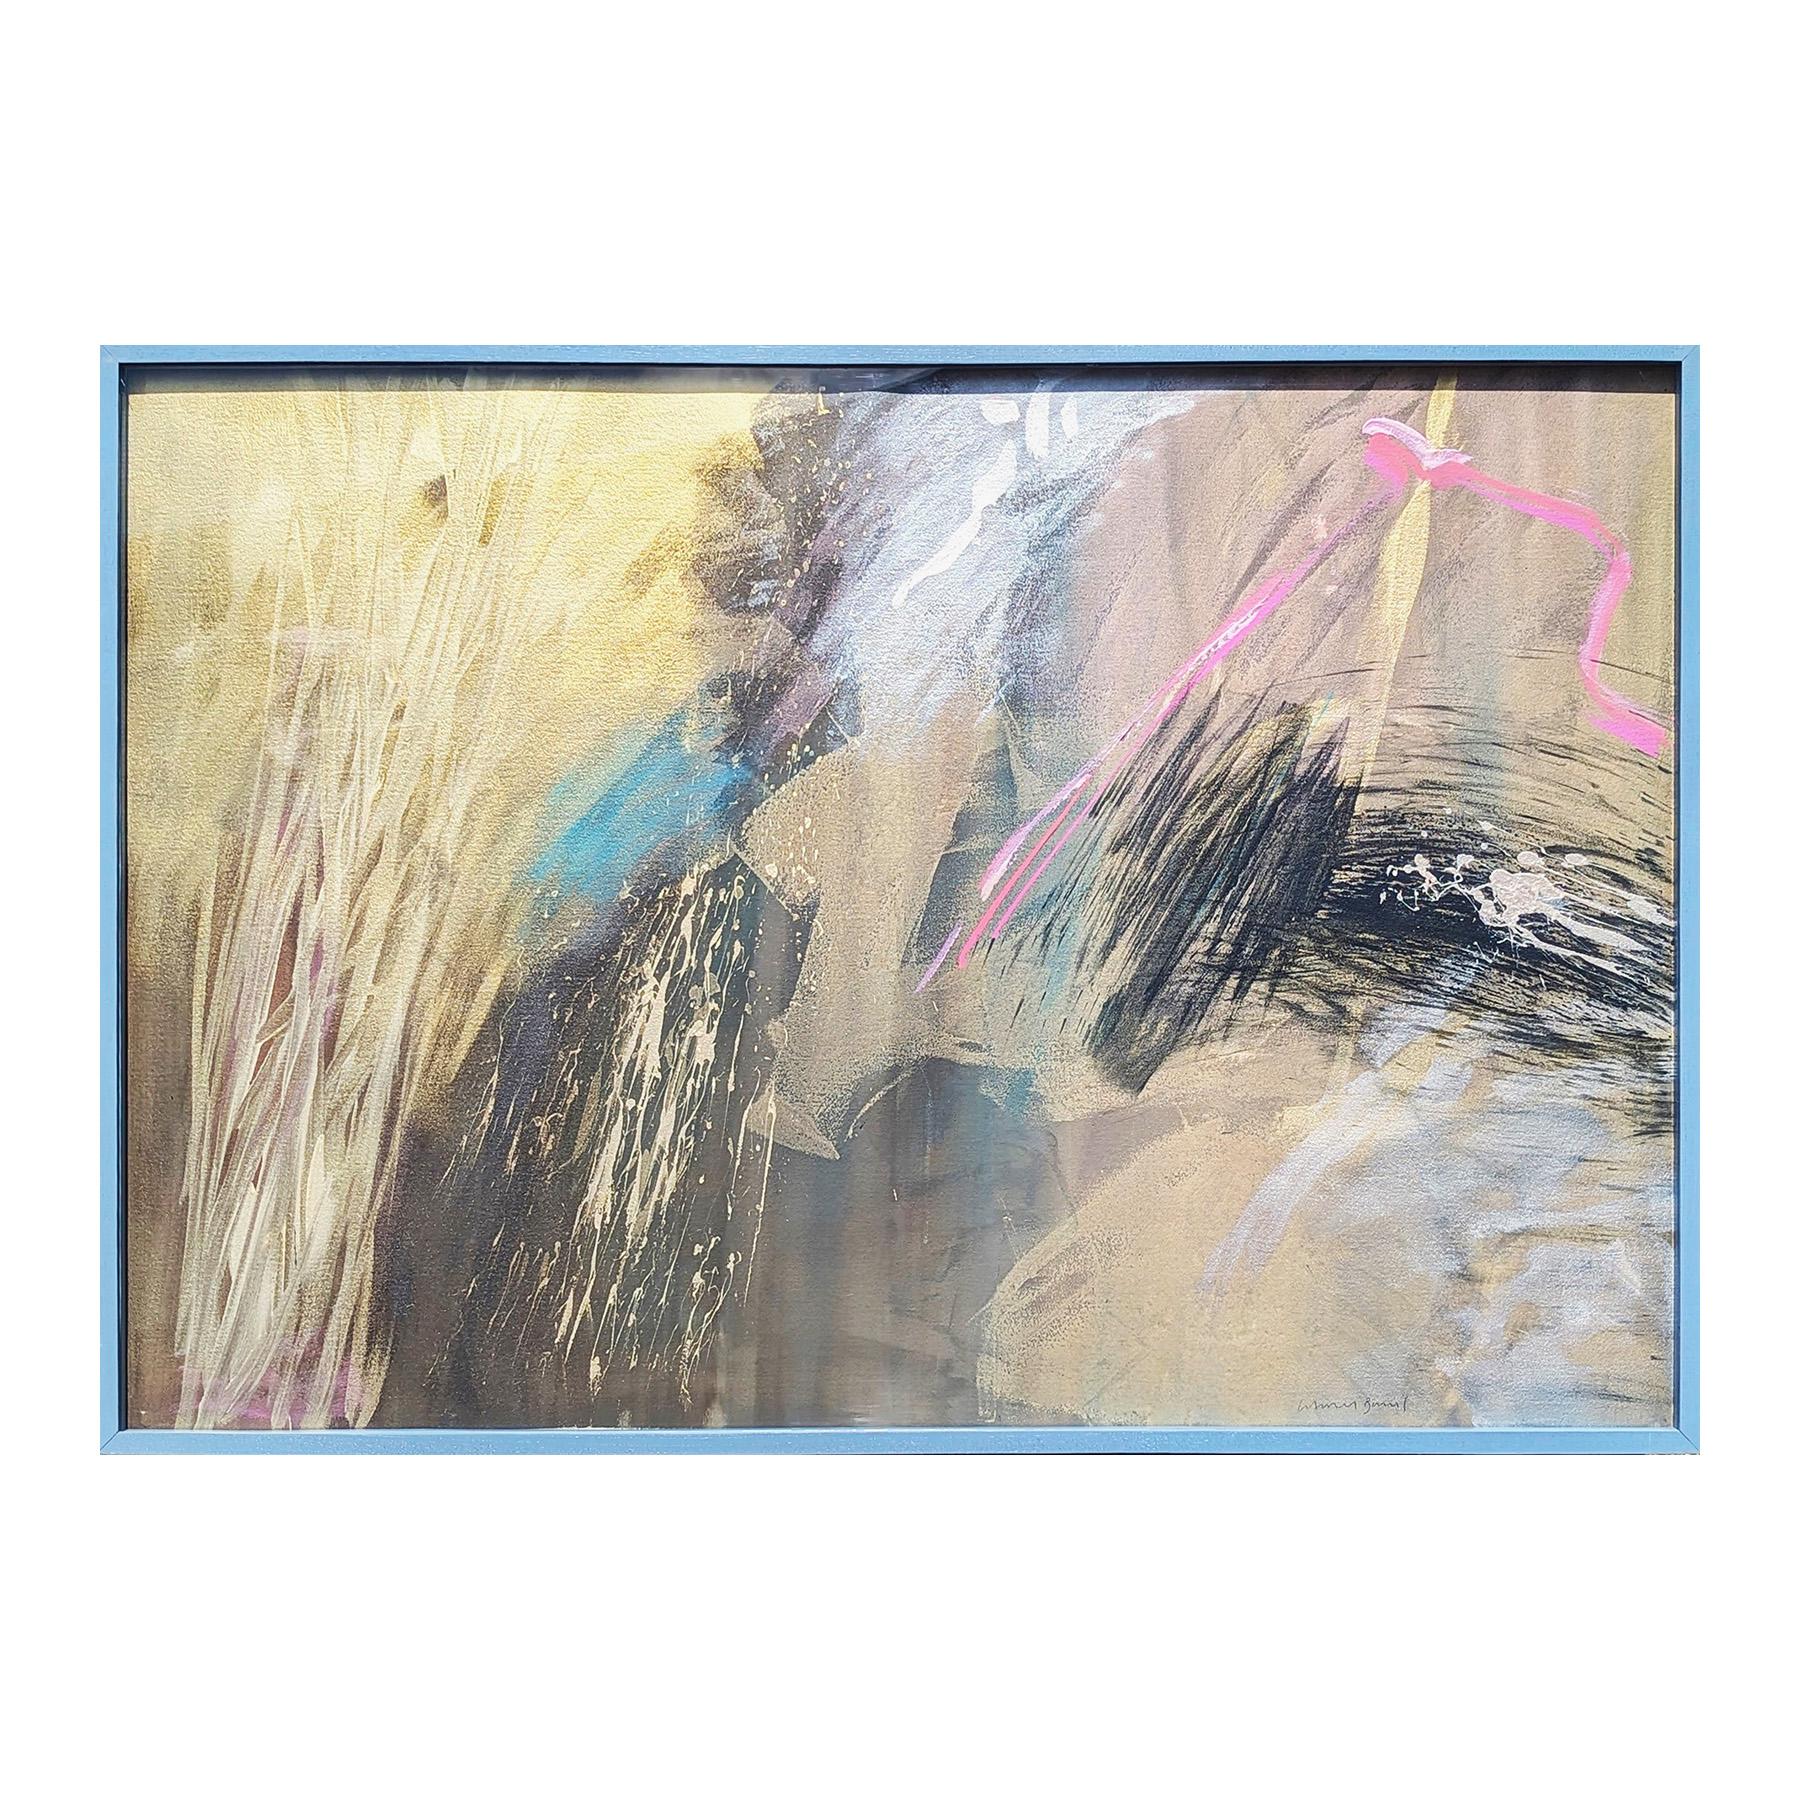 Modern mixed media abstract expressionist painting by artist Lamar Briggs. The work features strokes of black, purple, and blue against a gold background. Signed in the front lower right corner. Currently hung in simple a blue-grey frame.